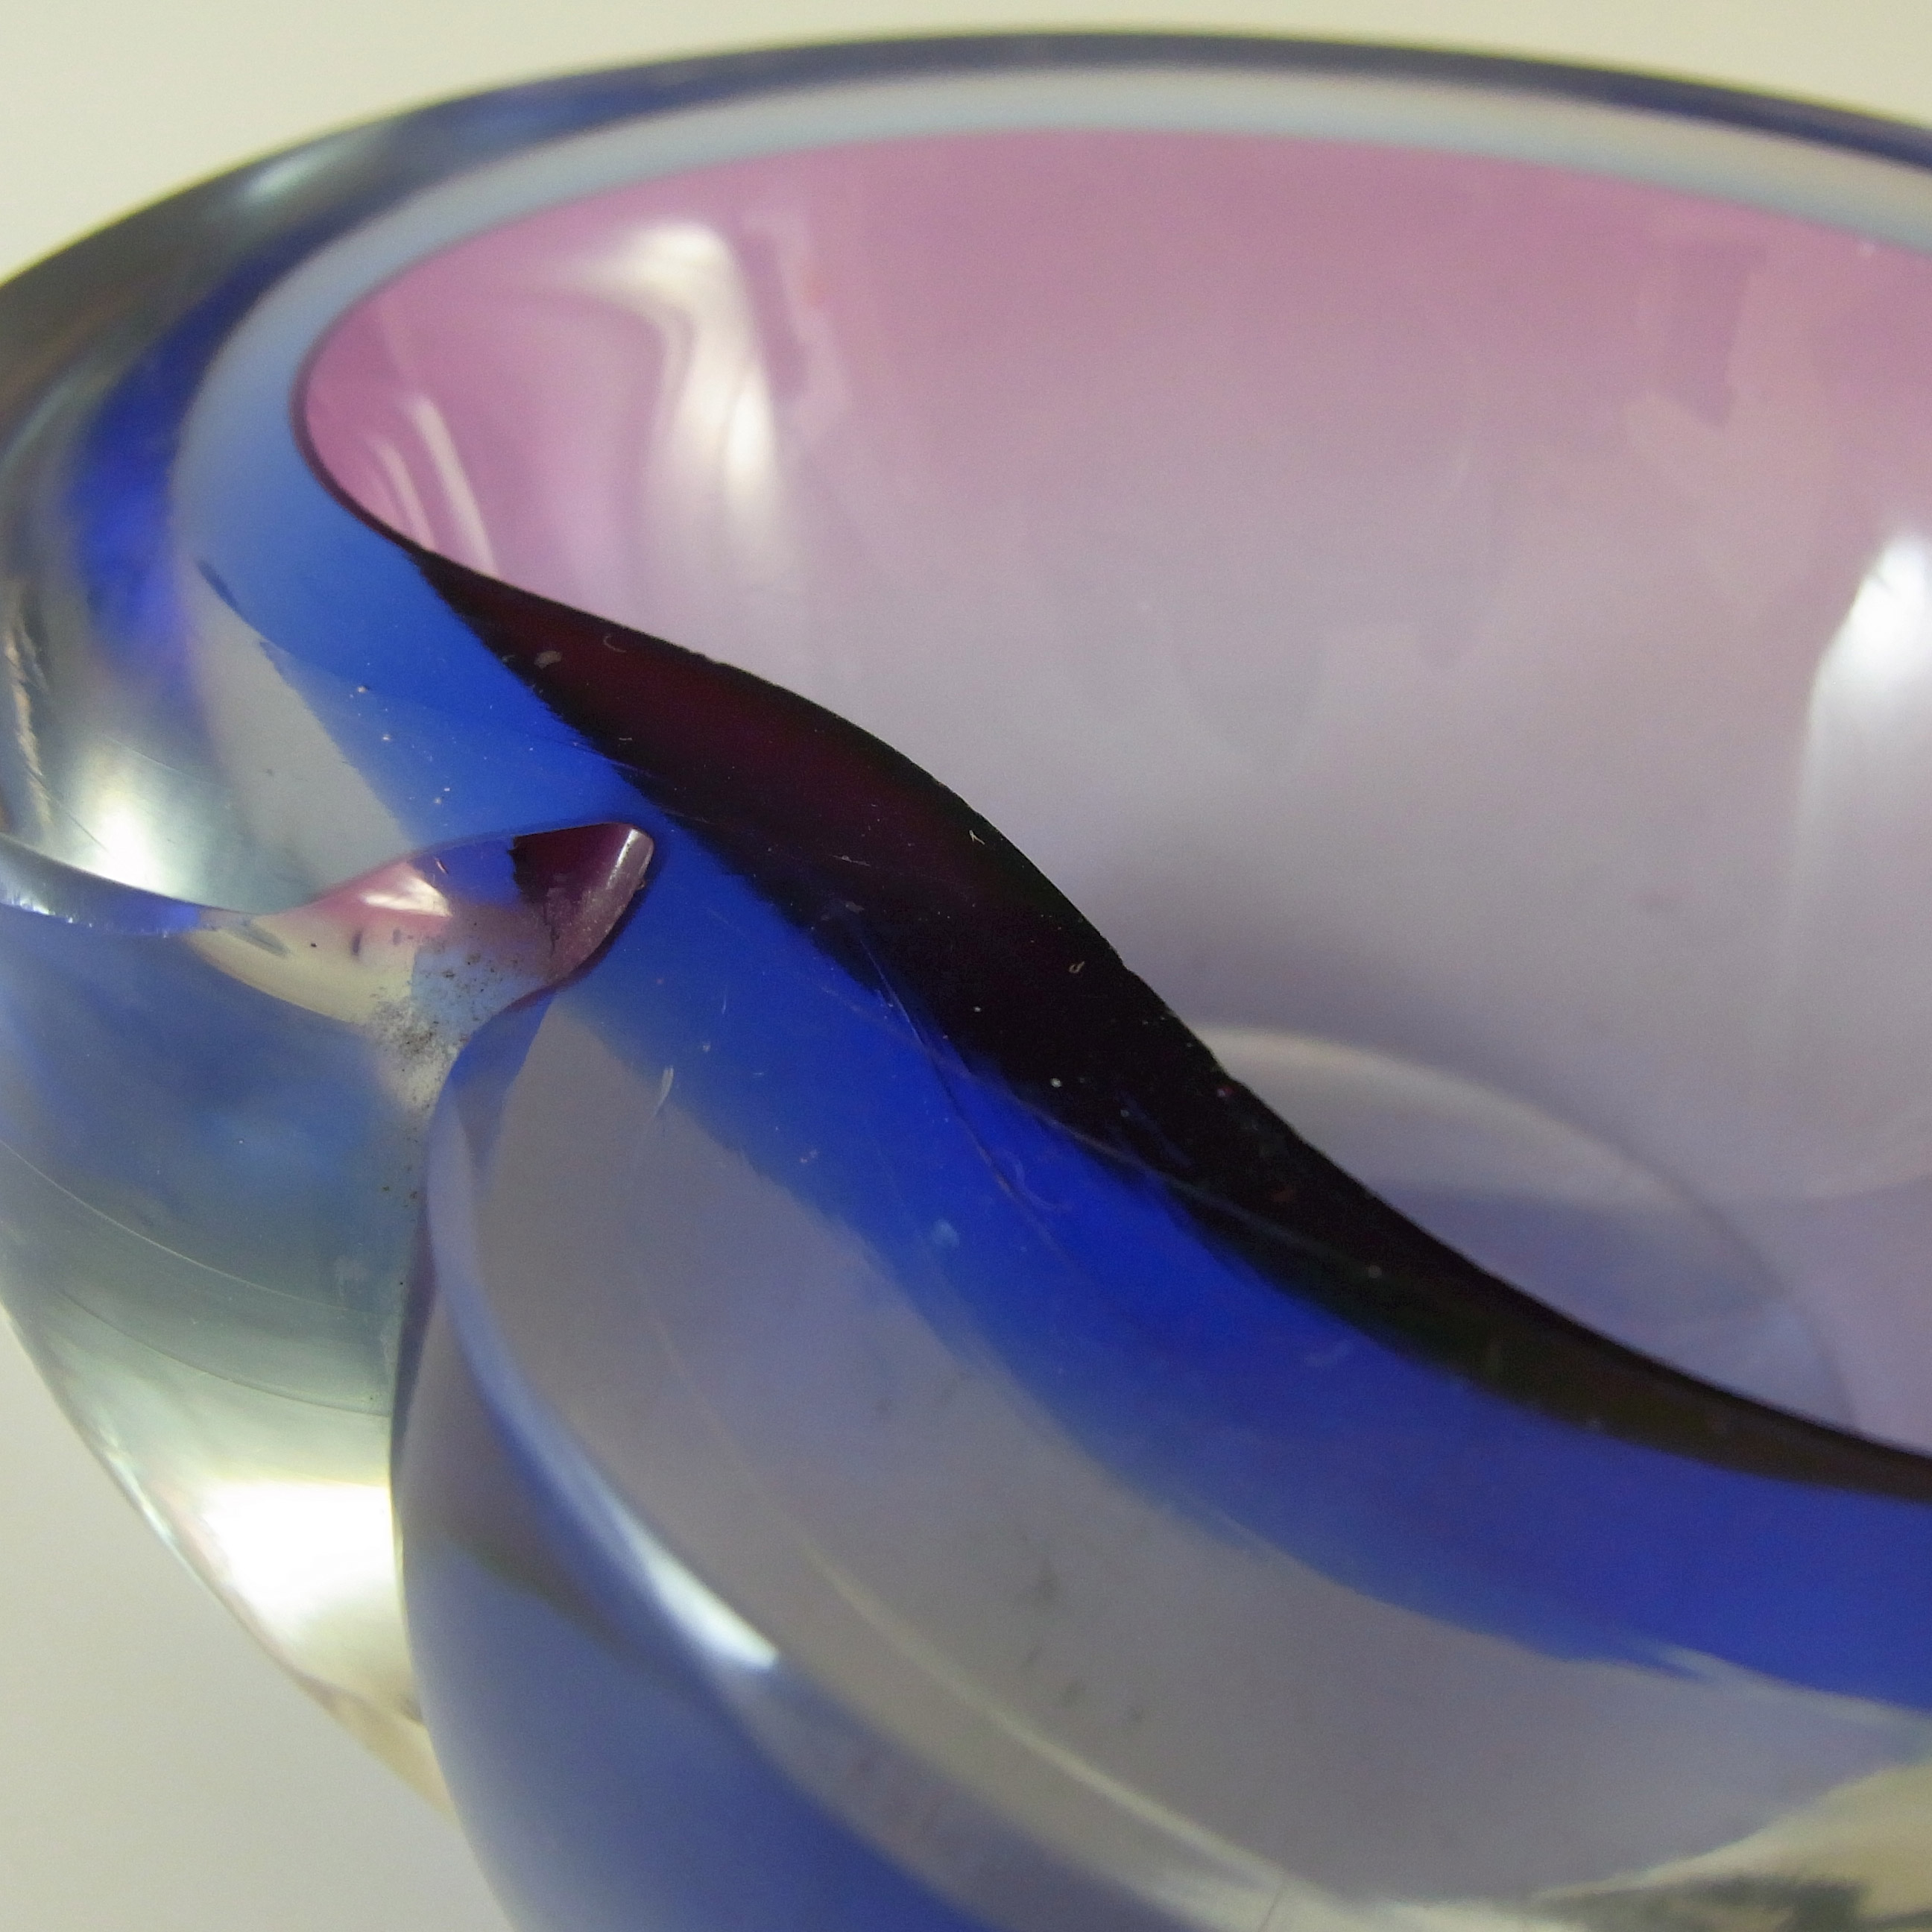 Murano Geode Purple & Blue Sommerso Glass Kidney Bowl - Click Image to Close